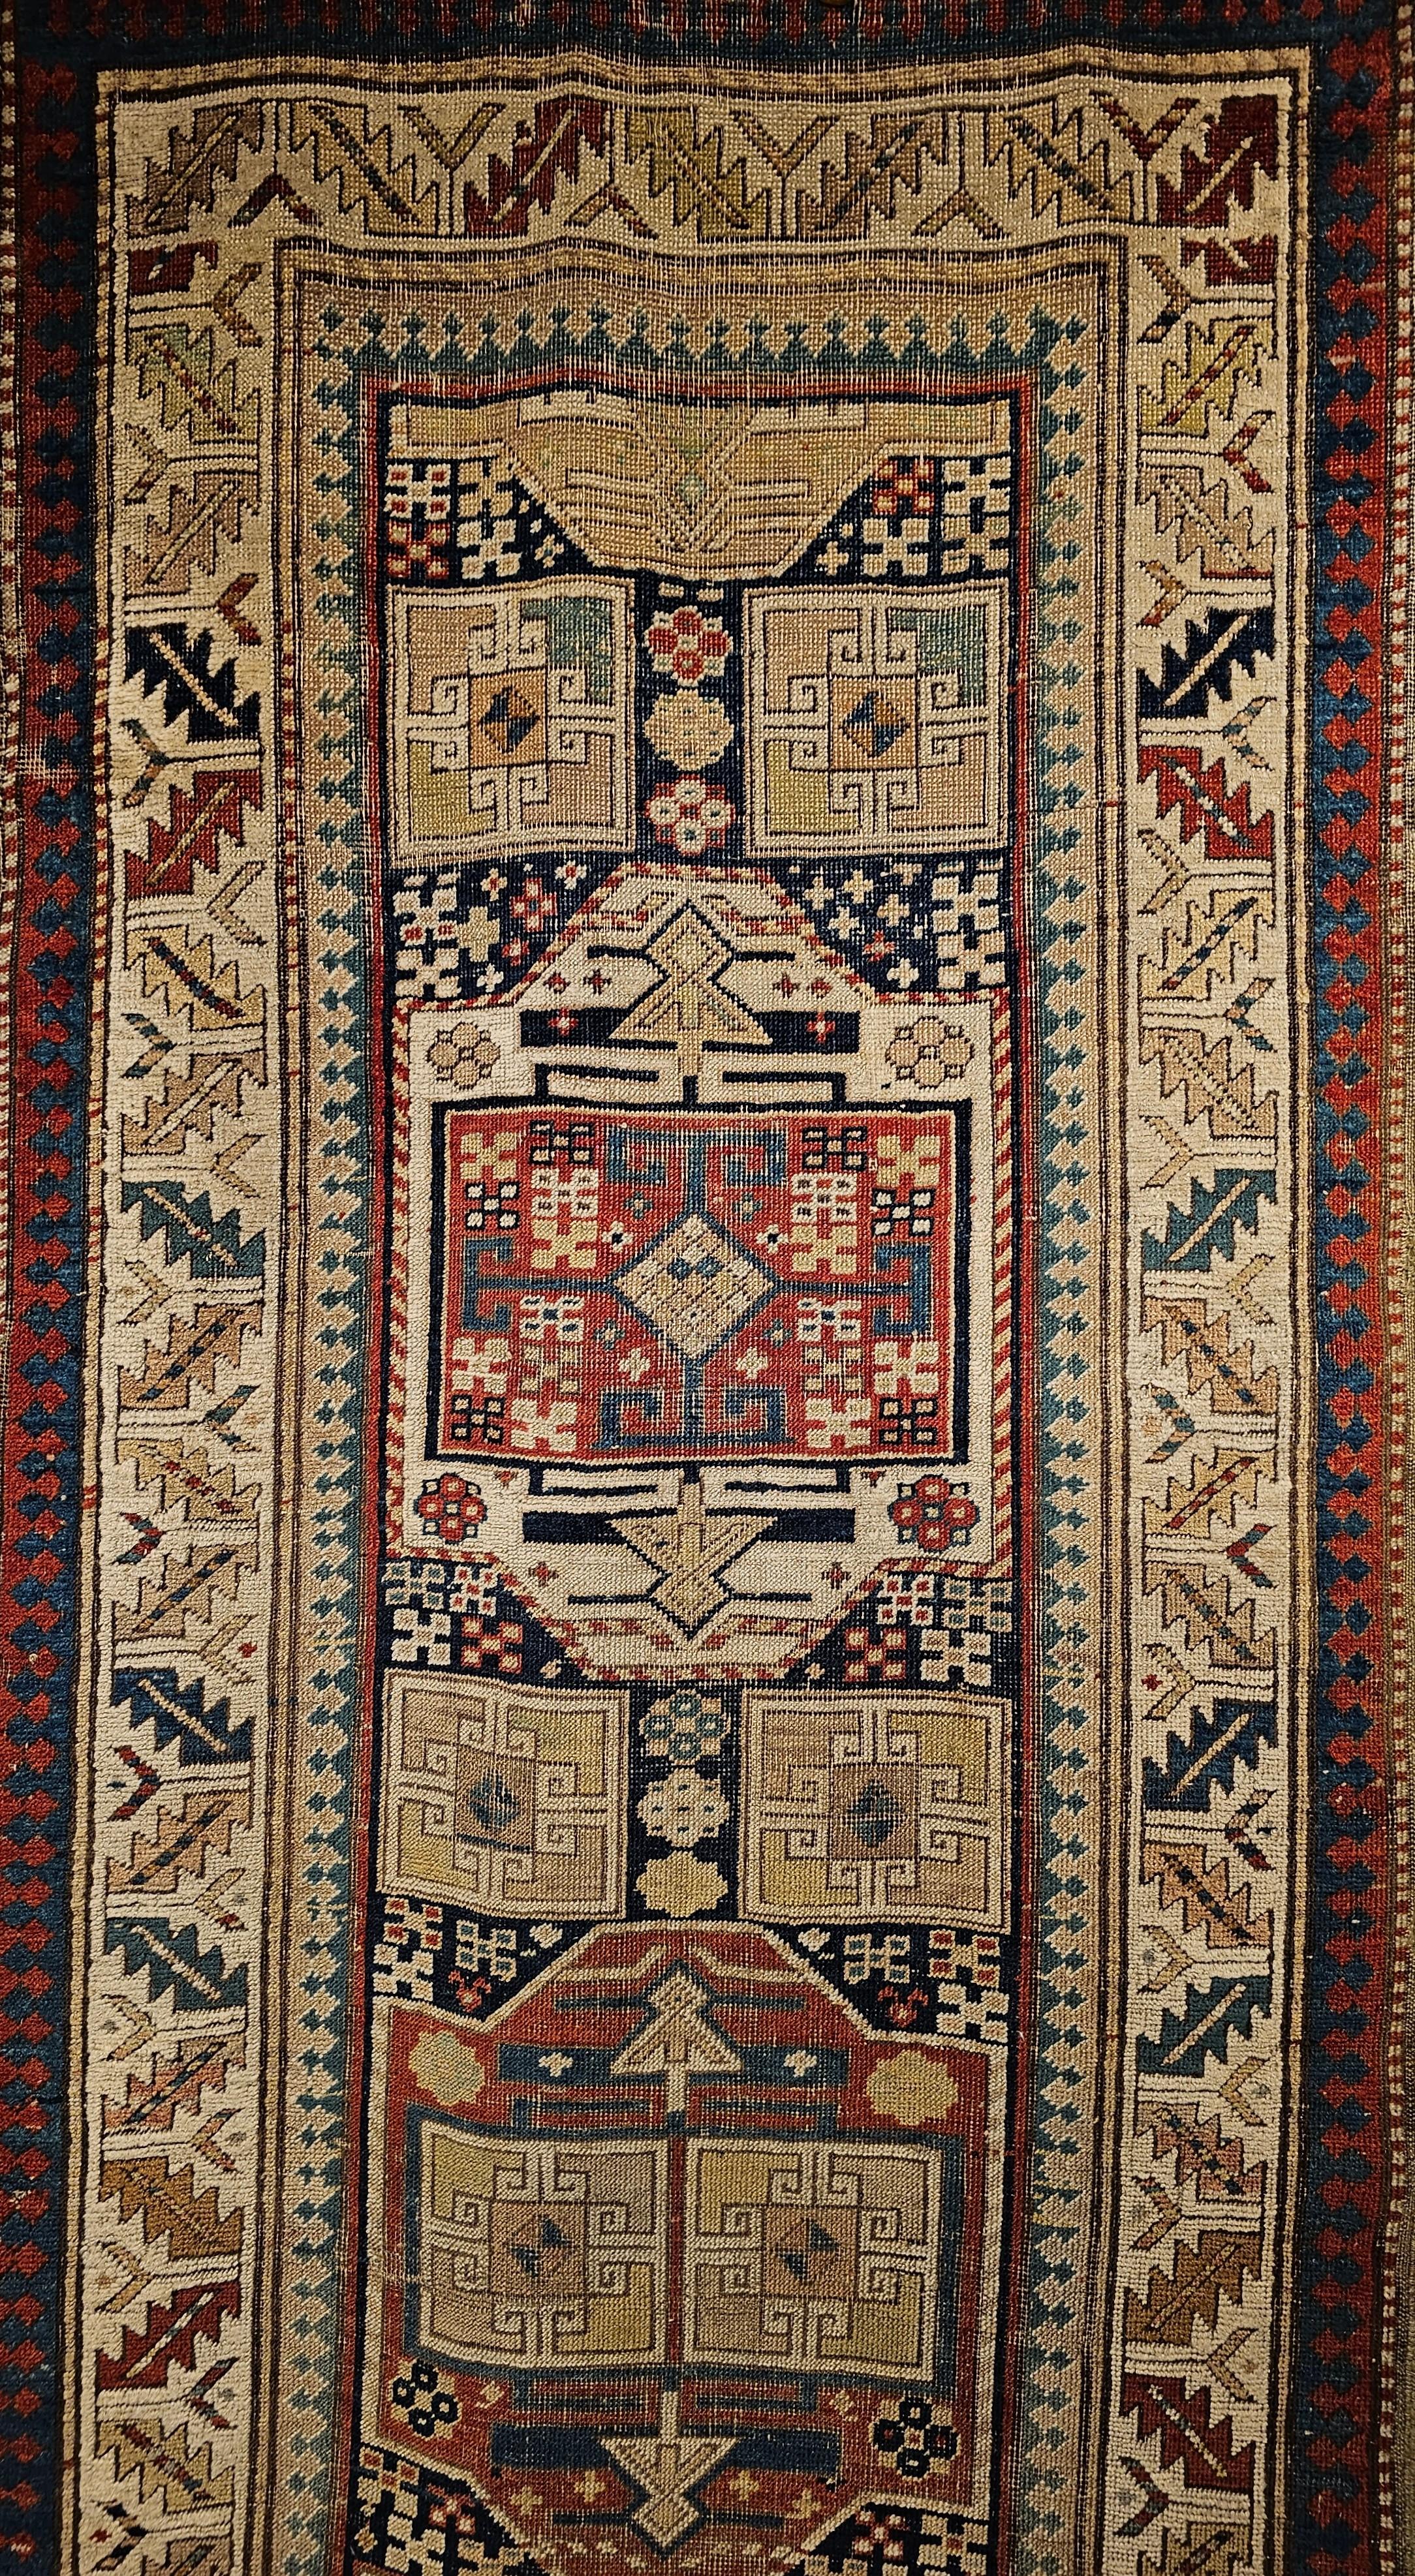 A triple medallion Karachov Kazak runner from the Caucasus region woven in the 4th quarter of the 1800s. The beauty of the rug is in having three large medallions each covering around one-third of the field and each having its own design and color